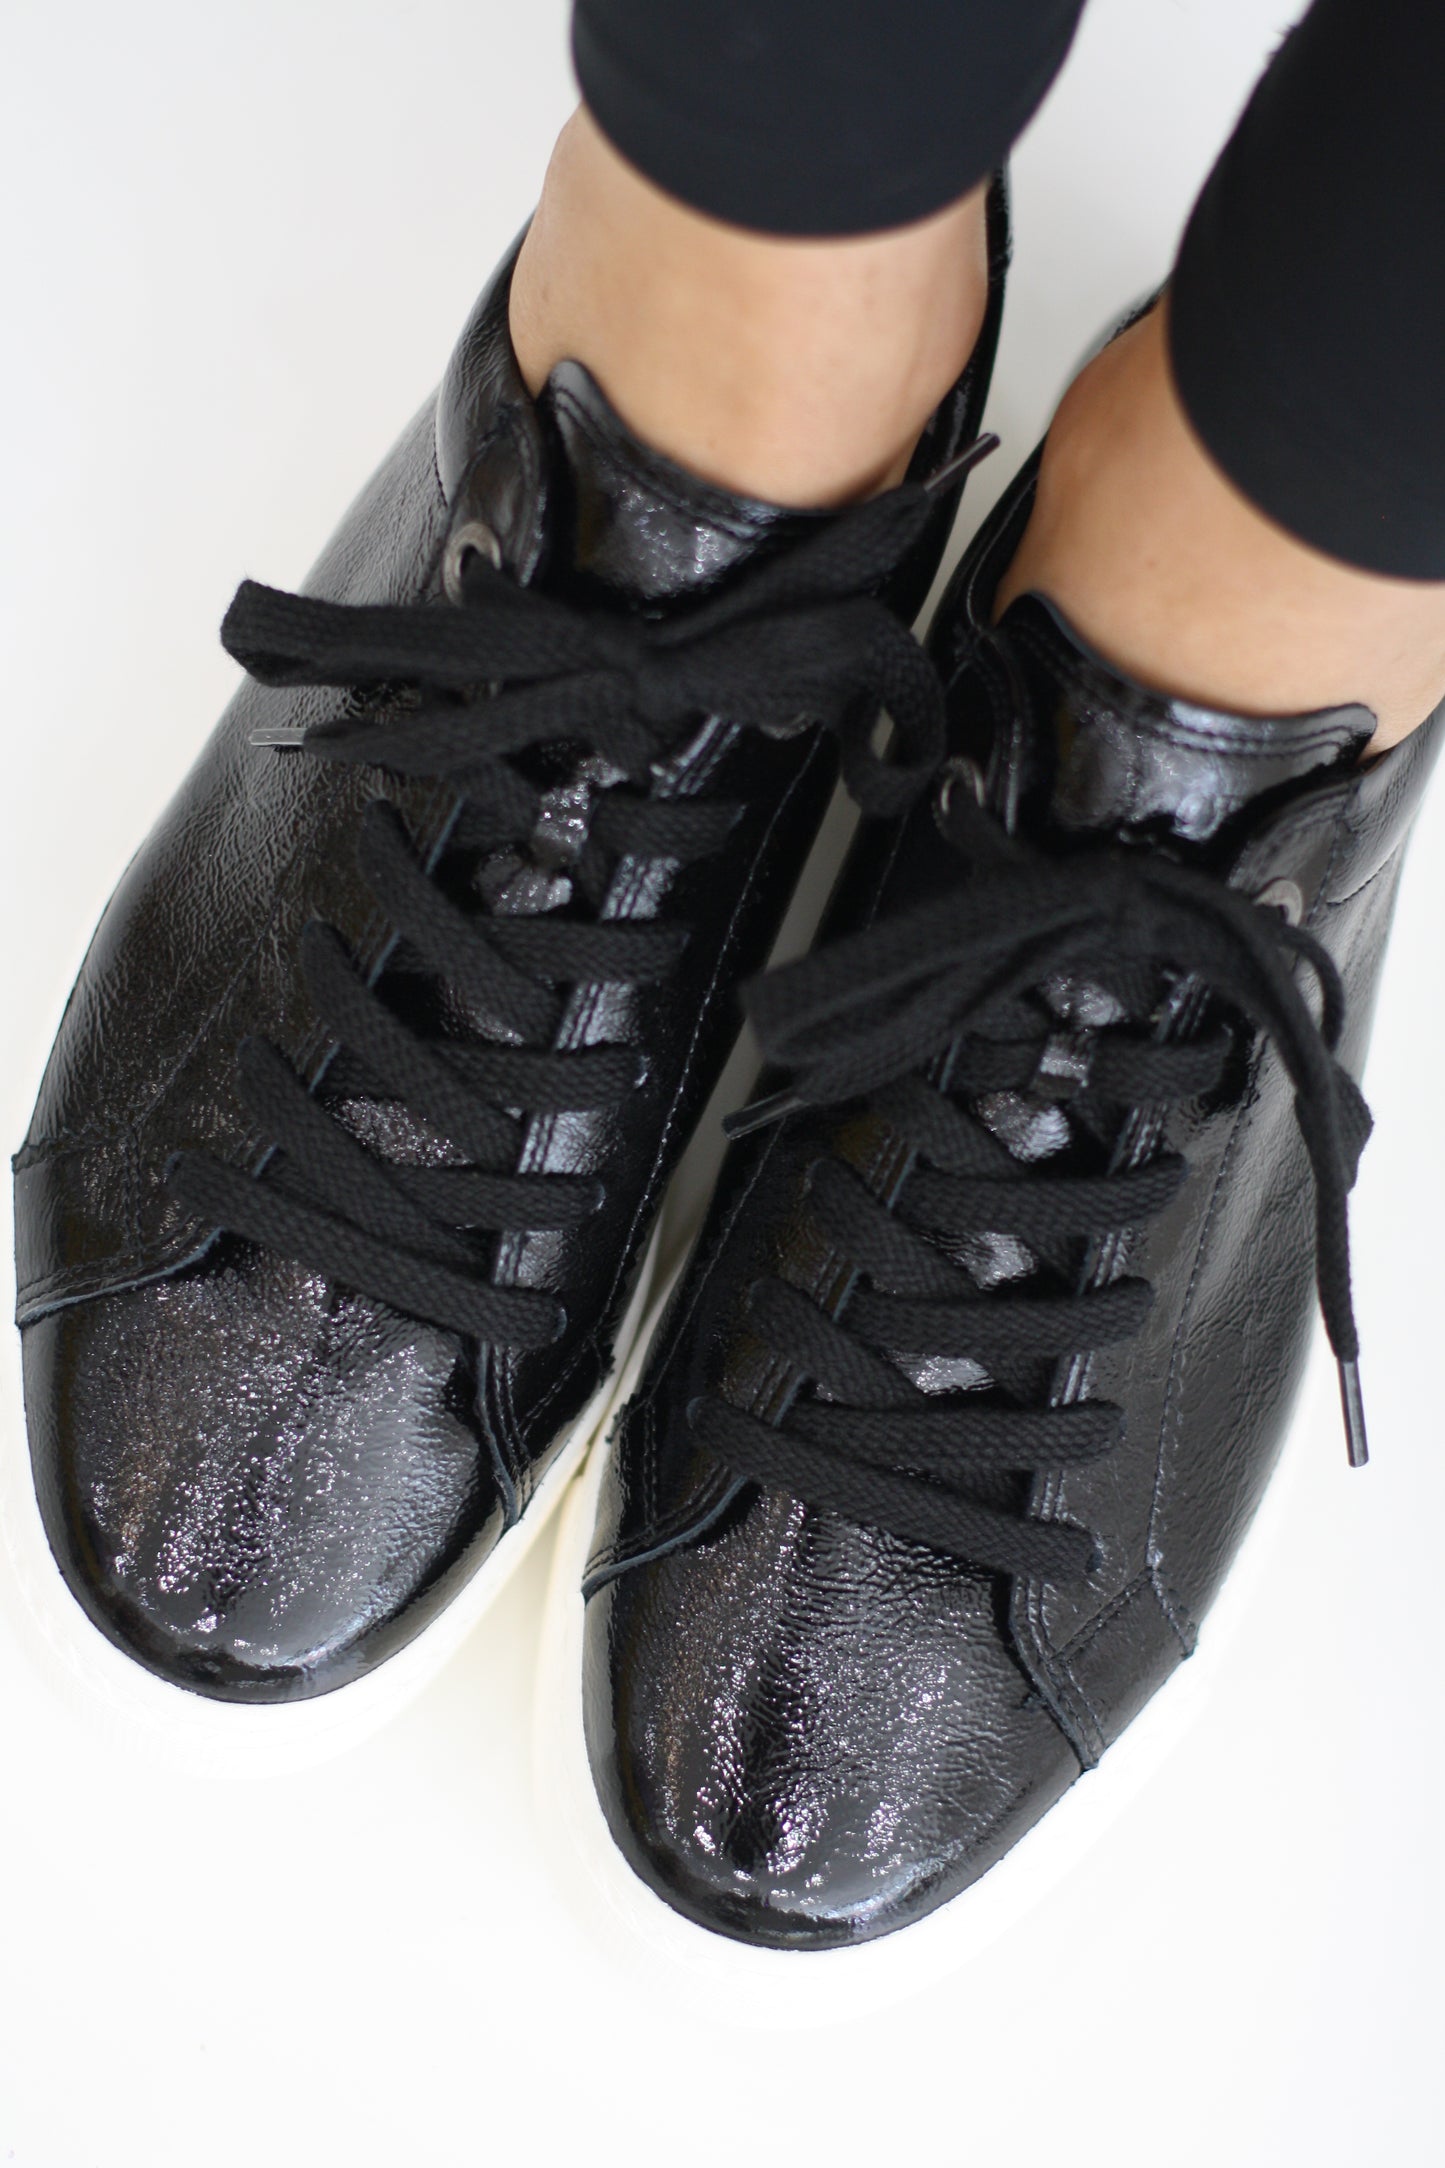 PAUL GREEN 5241 BLACK PATENT LEATHER TRAINERS